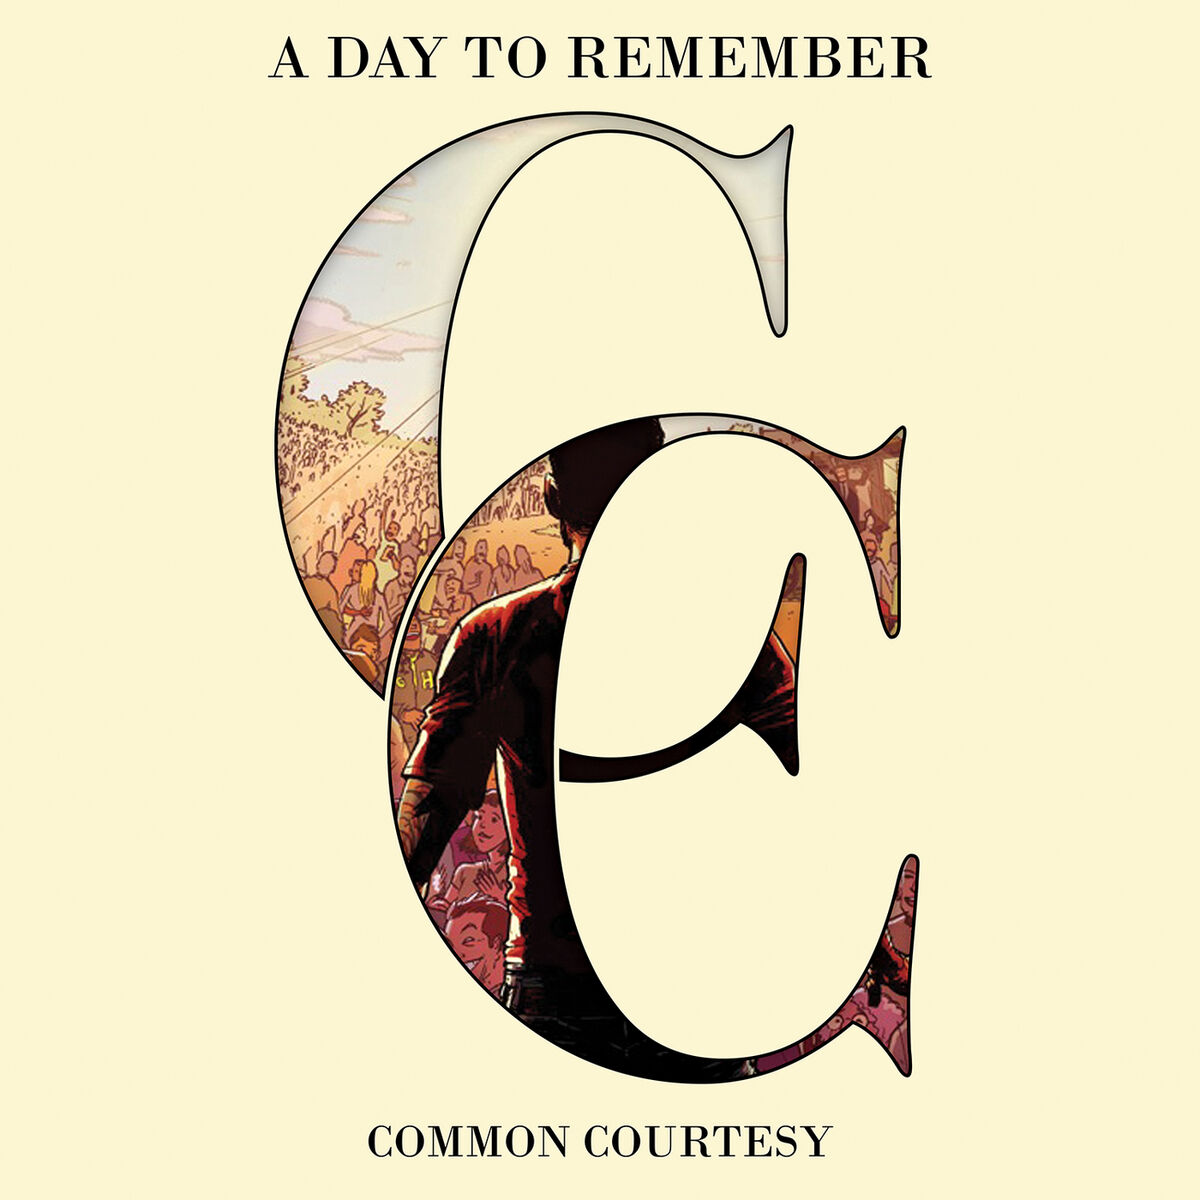 A Day to Remember - Common Courtesy [Deluxe Edition] (2013)